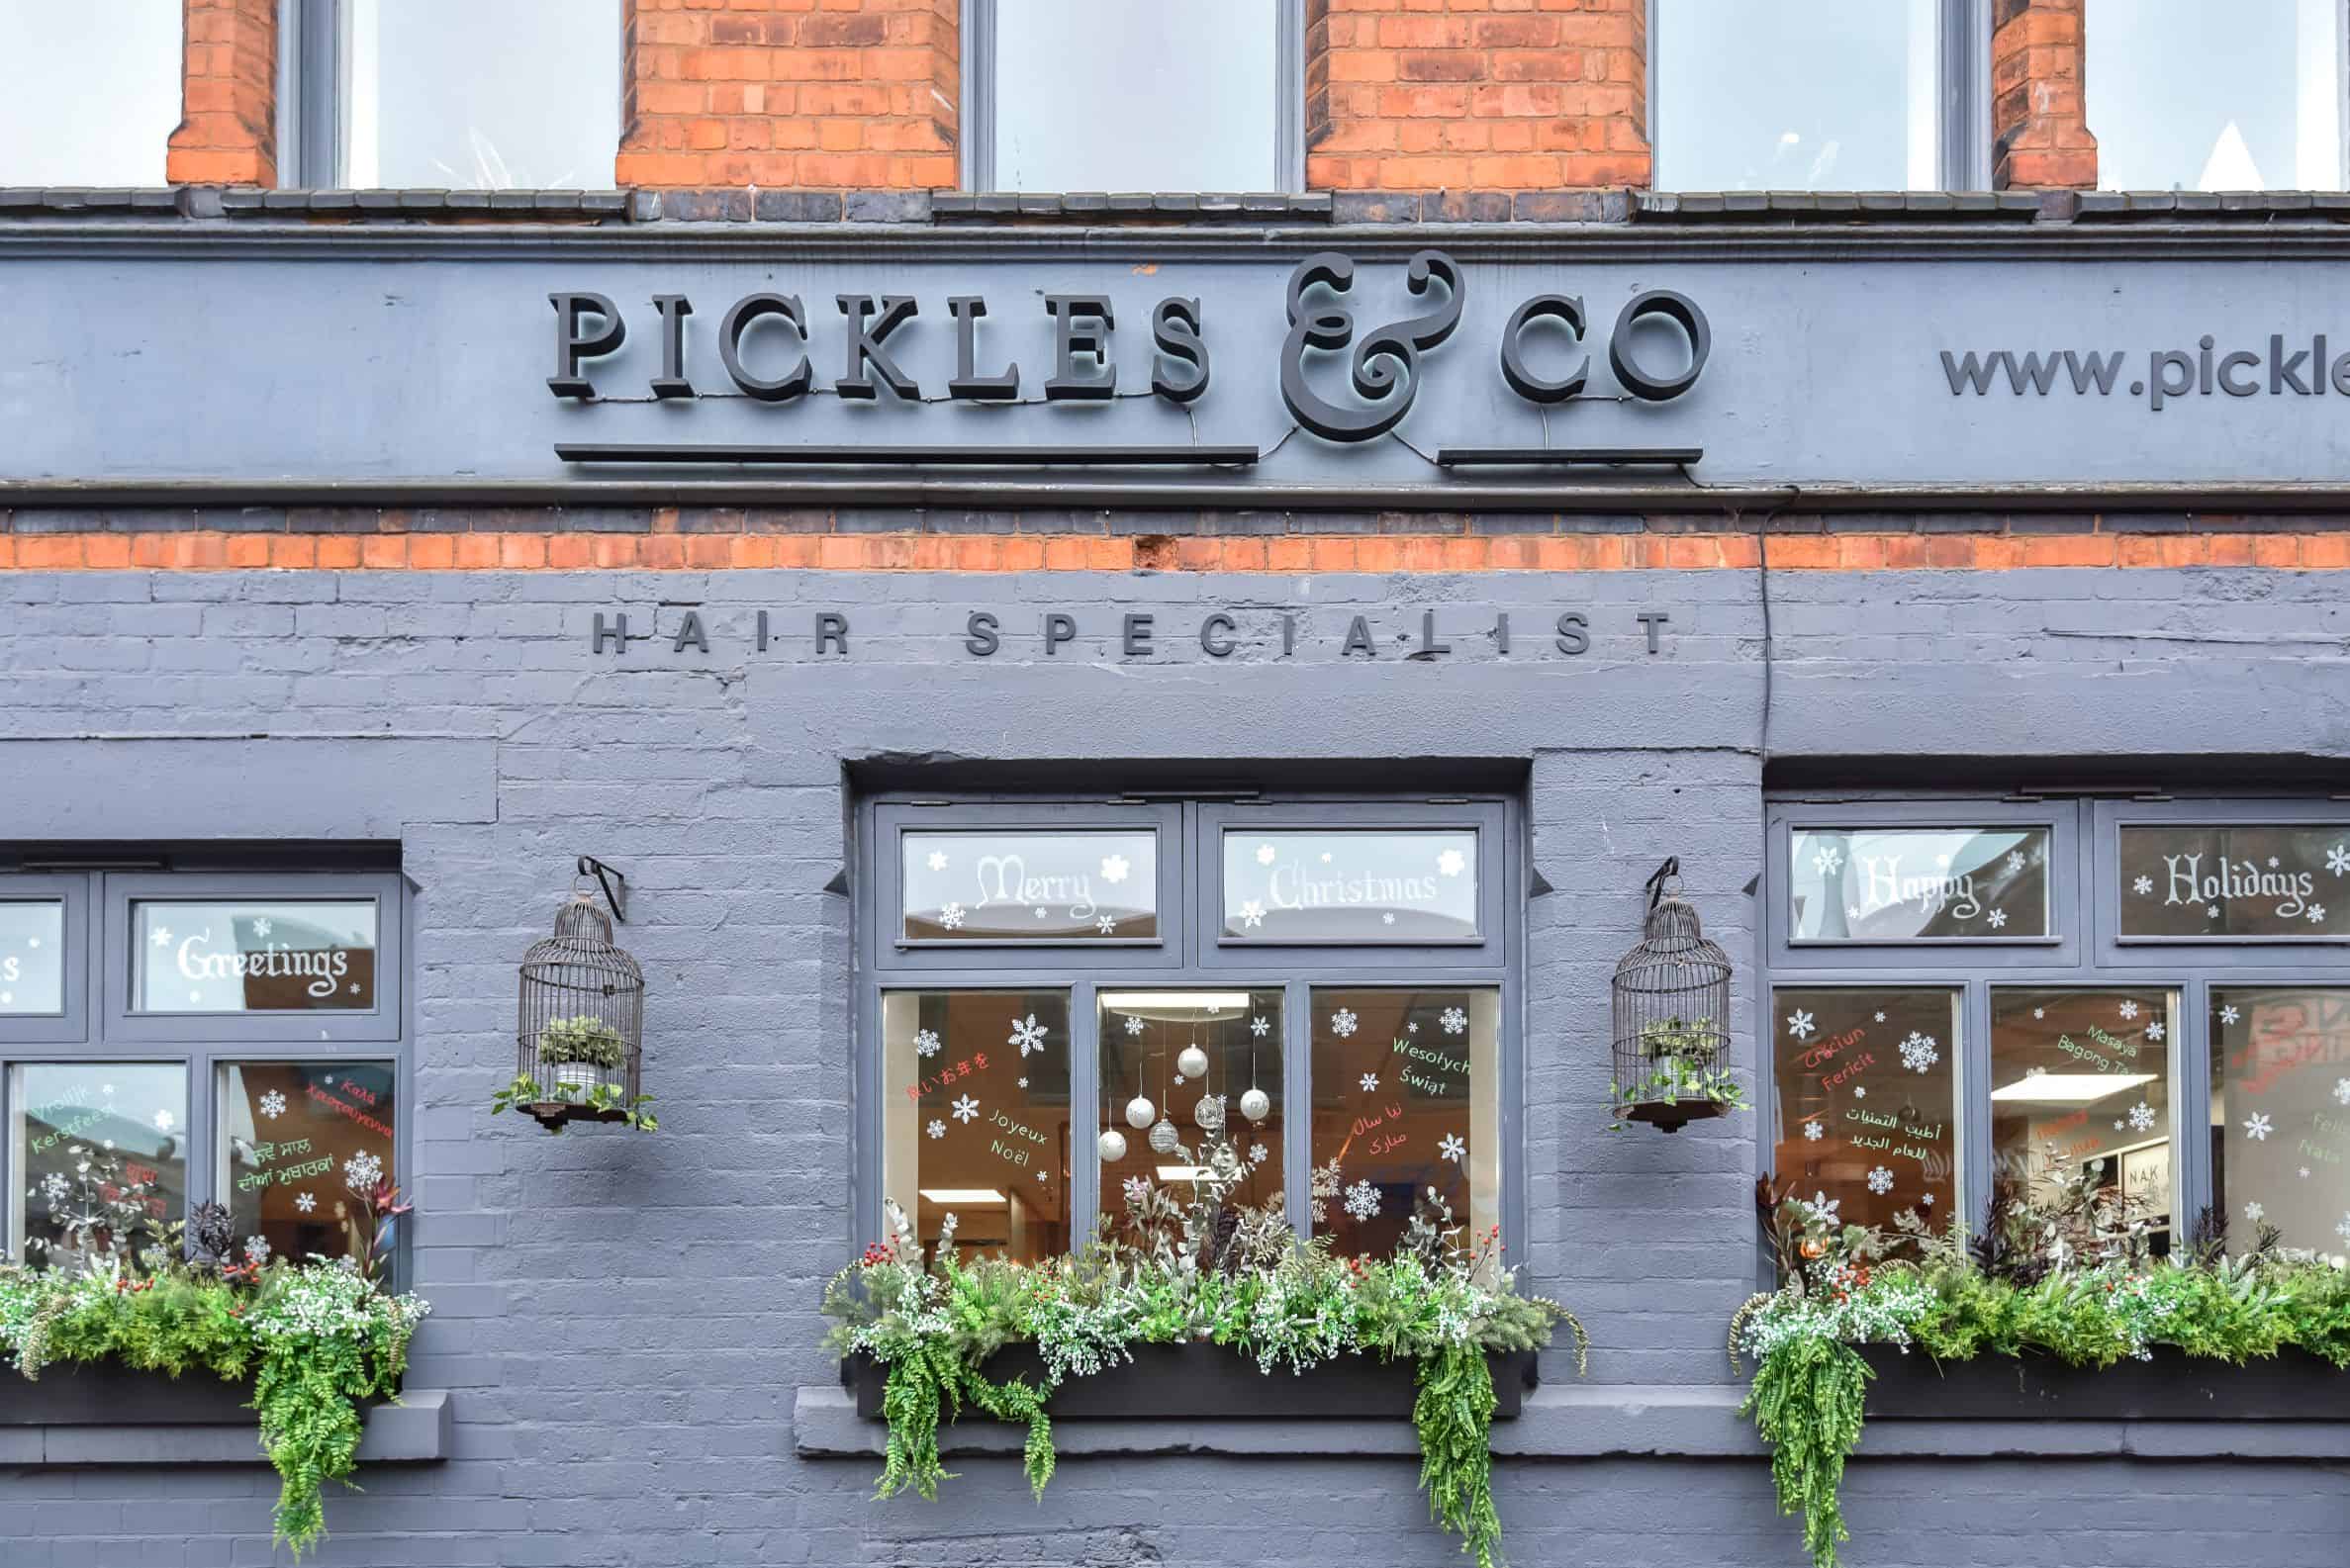 51. Pickles & Co